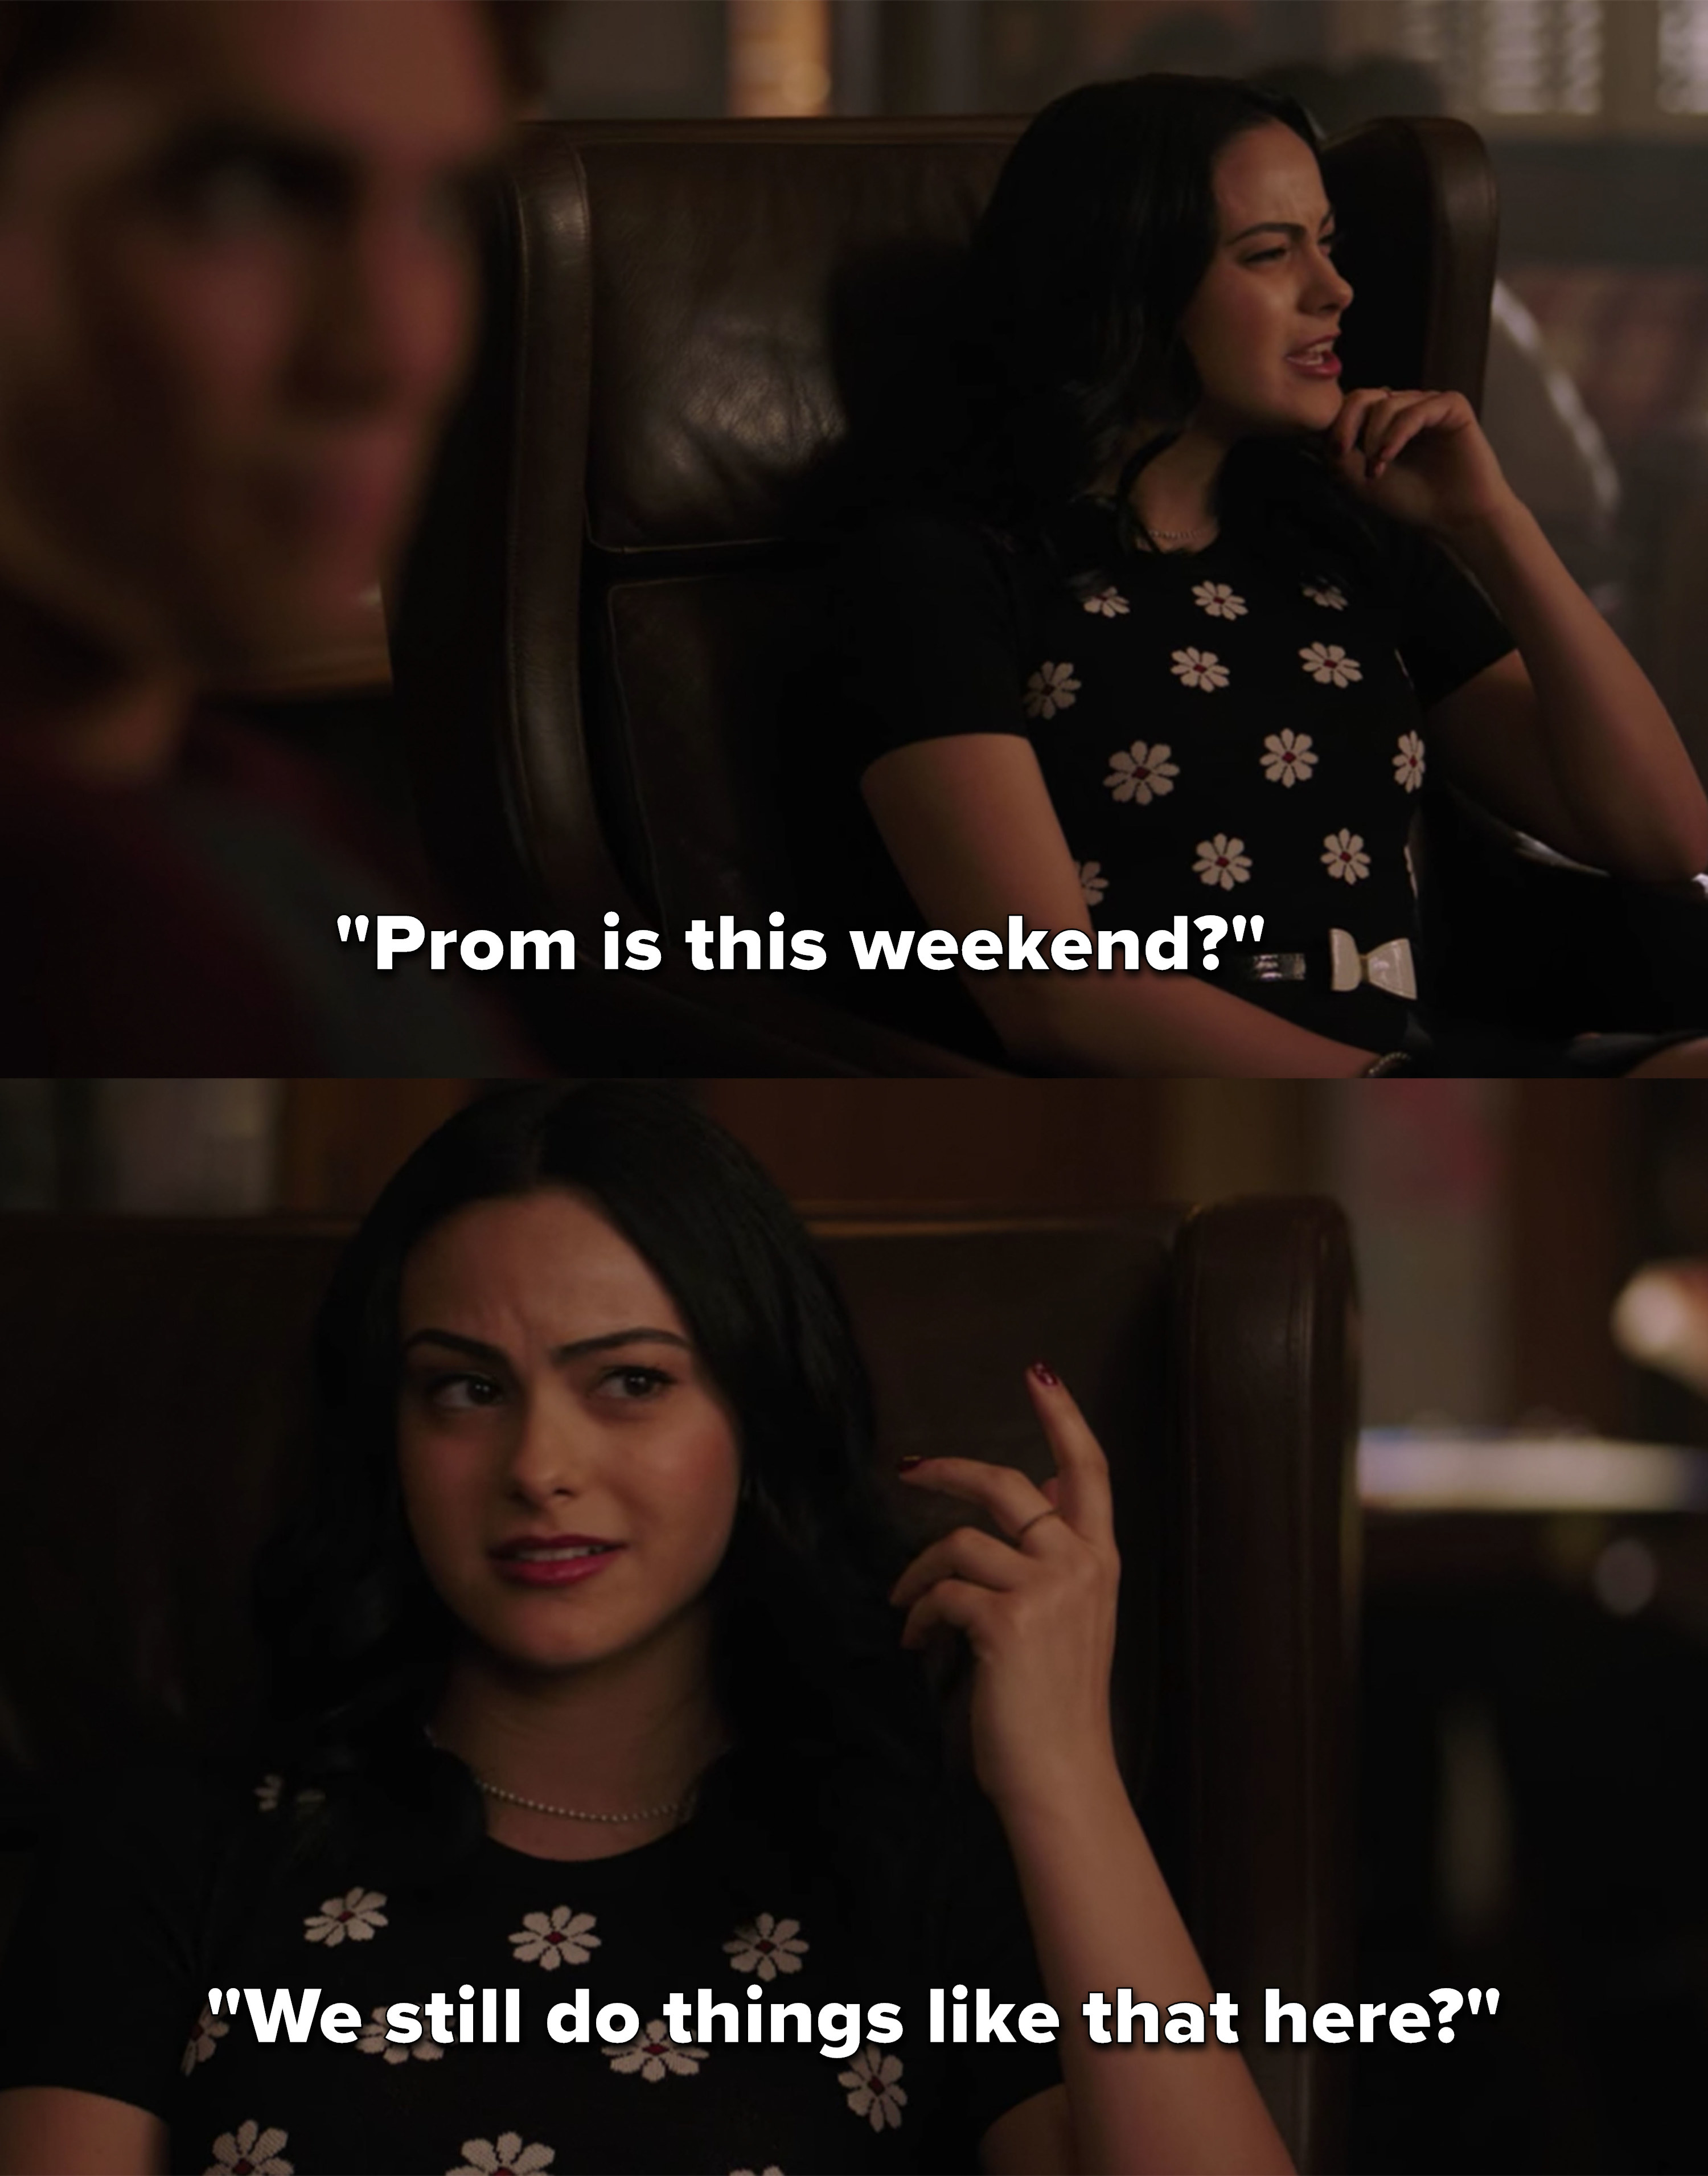 Veronica: &quot;Prom is this weekend? We still do things like that here?&quot;